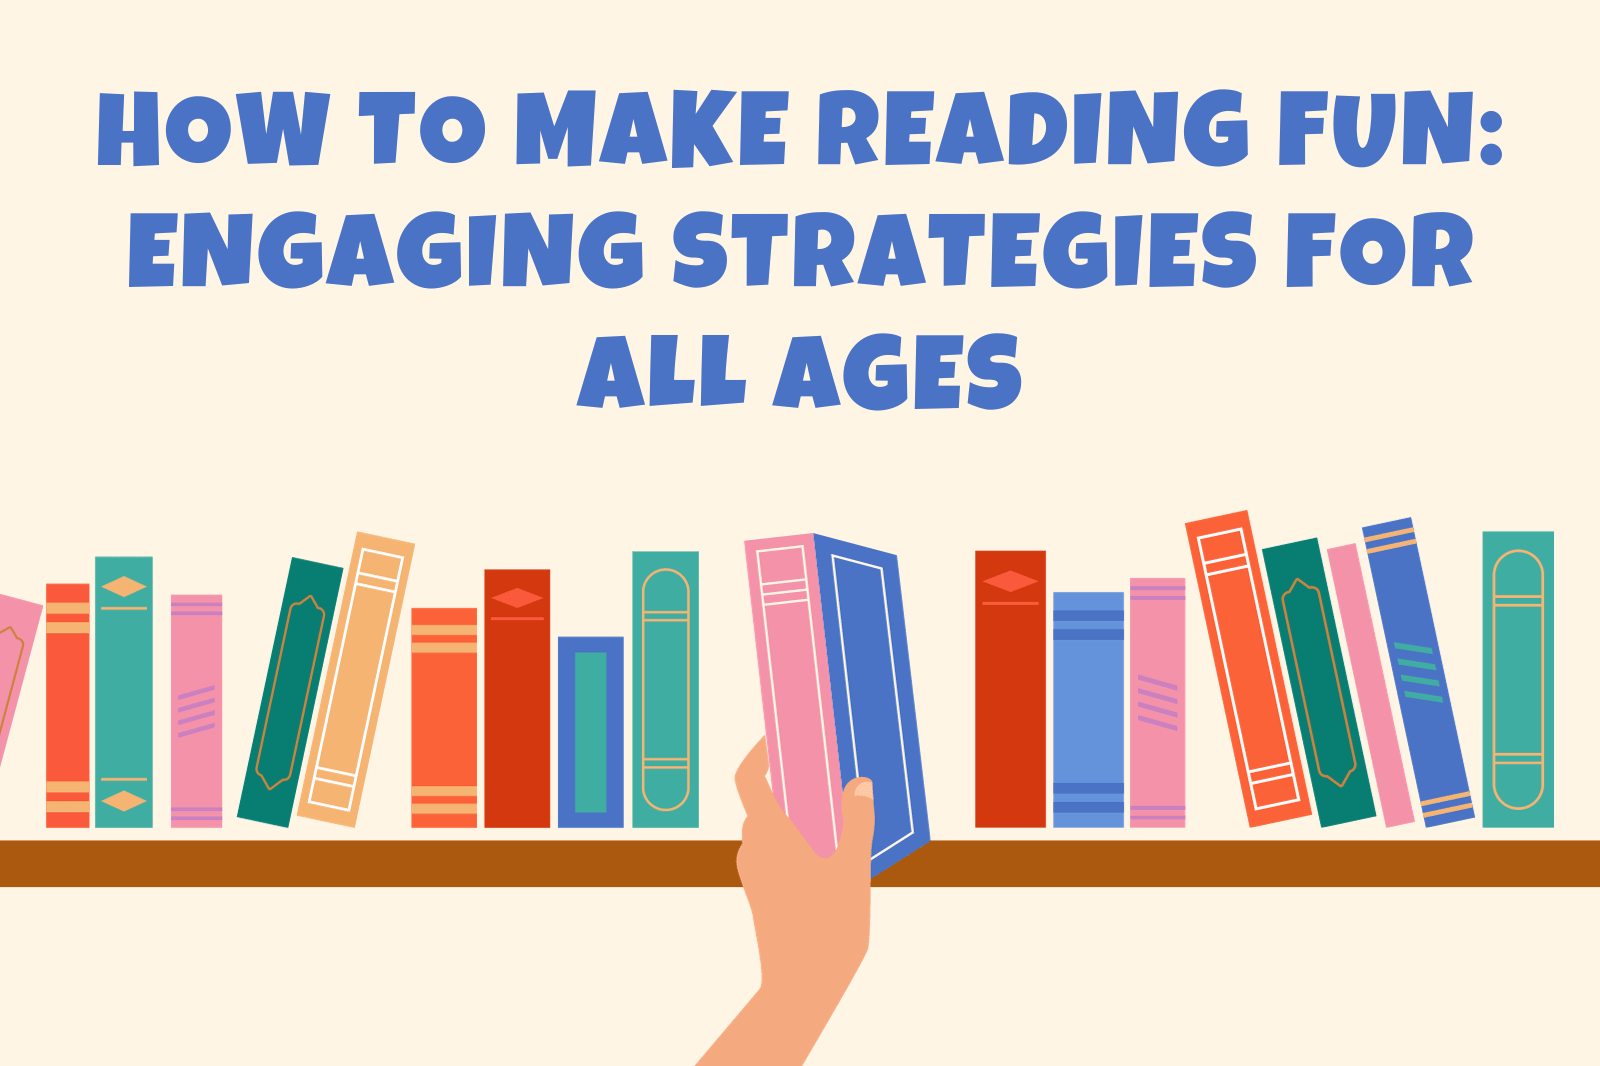 How to Make Reading Fun: Engaging Strategies for All Ages